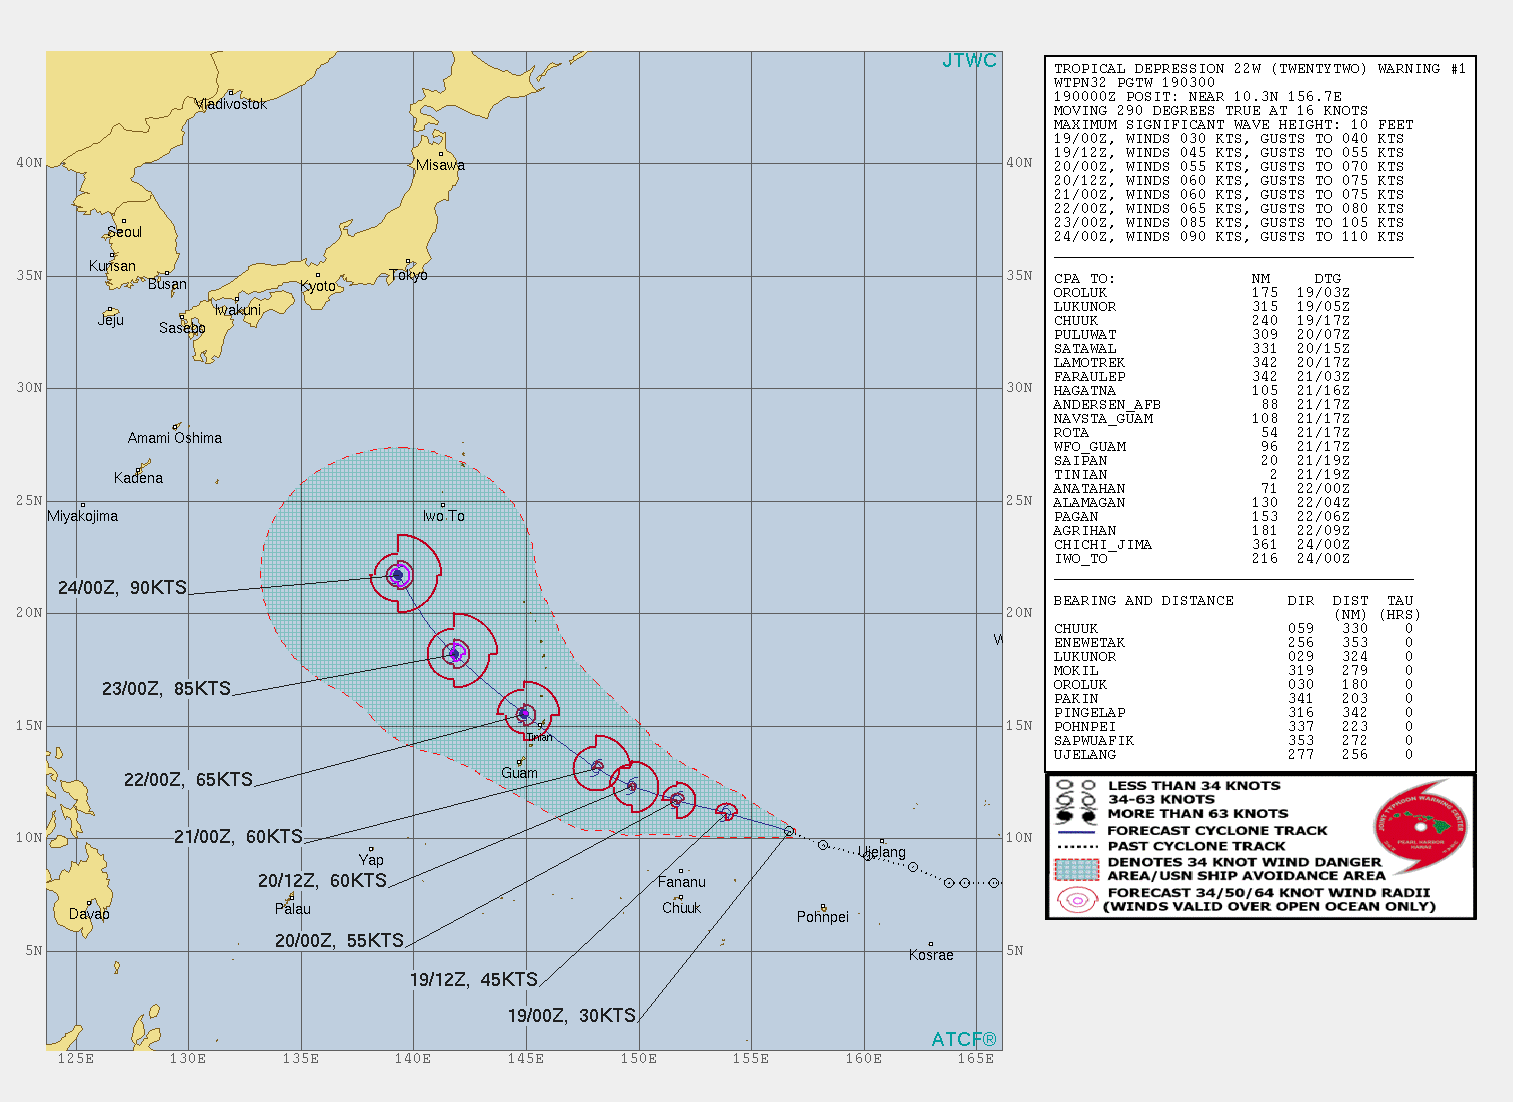 22W: FORECAST TO REACH TYPHOON INTENSITY IN APPRX 72H